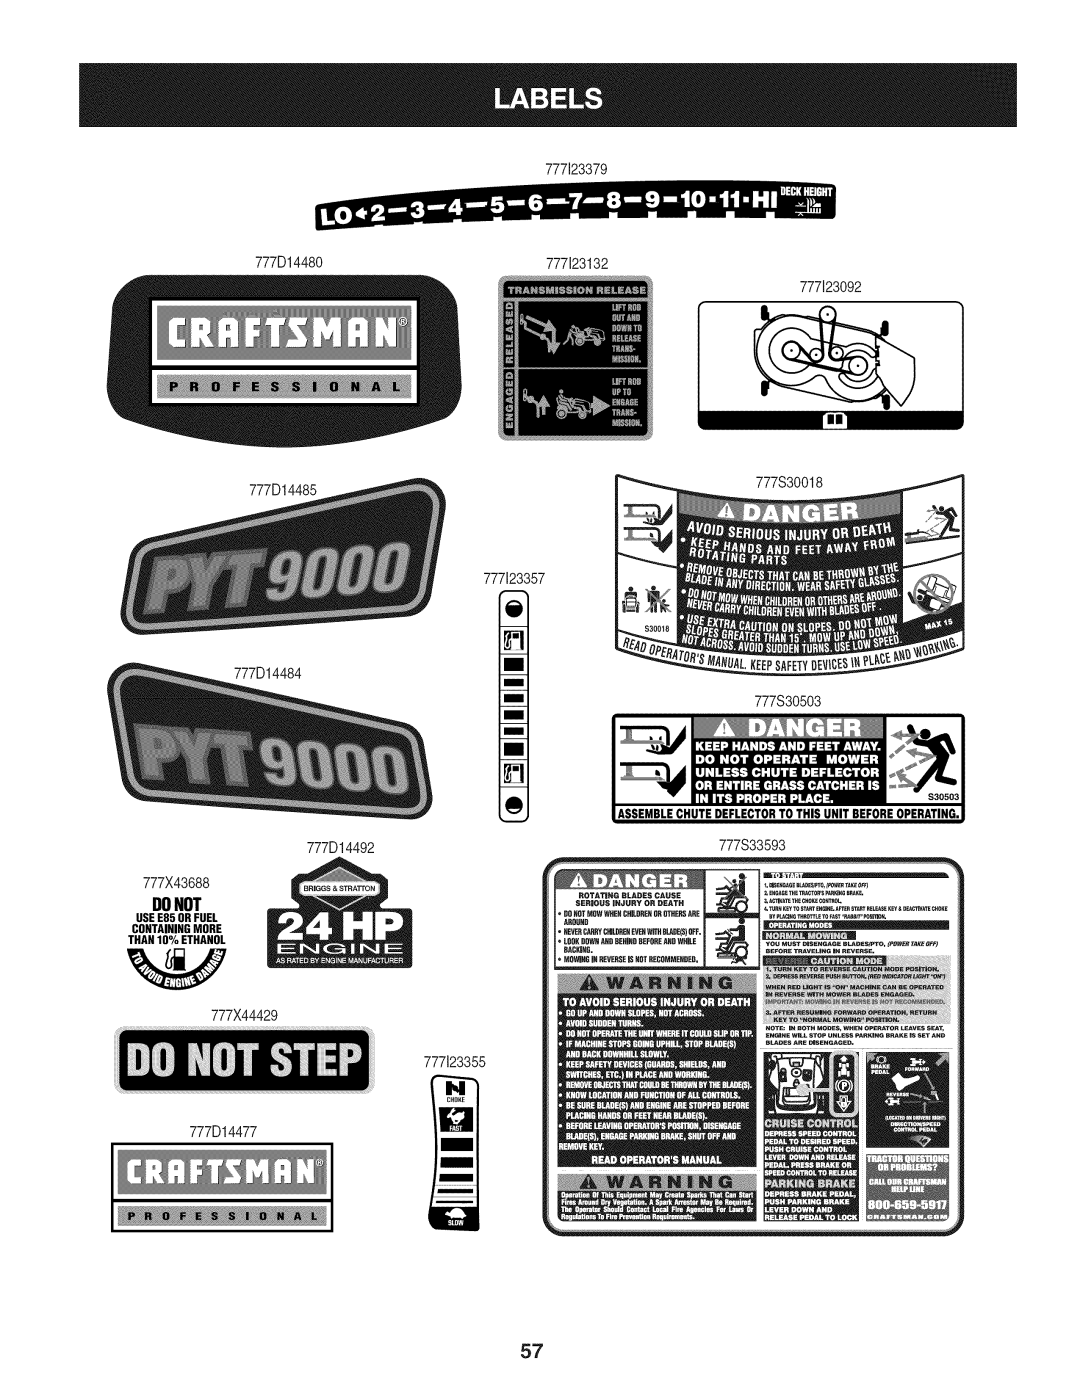 Craftsman 247.28672, PYT 9000 manual Donot, USEE85 ORFUEL CONTAININGMORE THAN10% ETHANOL 